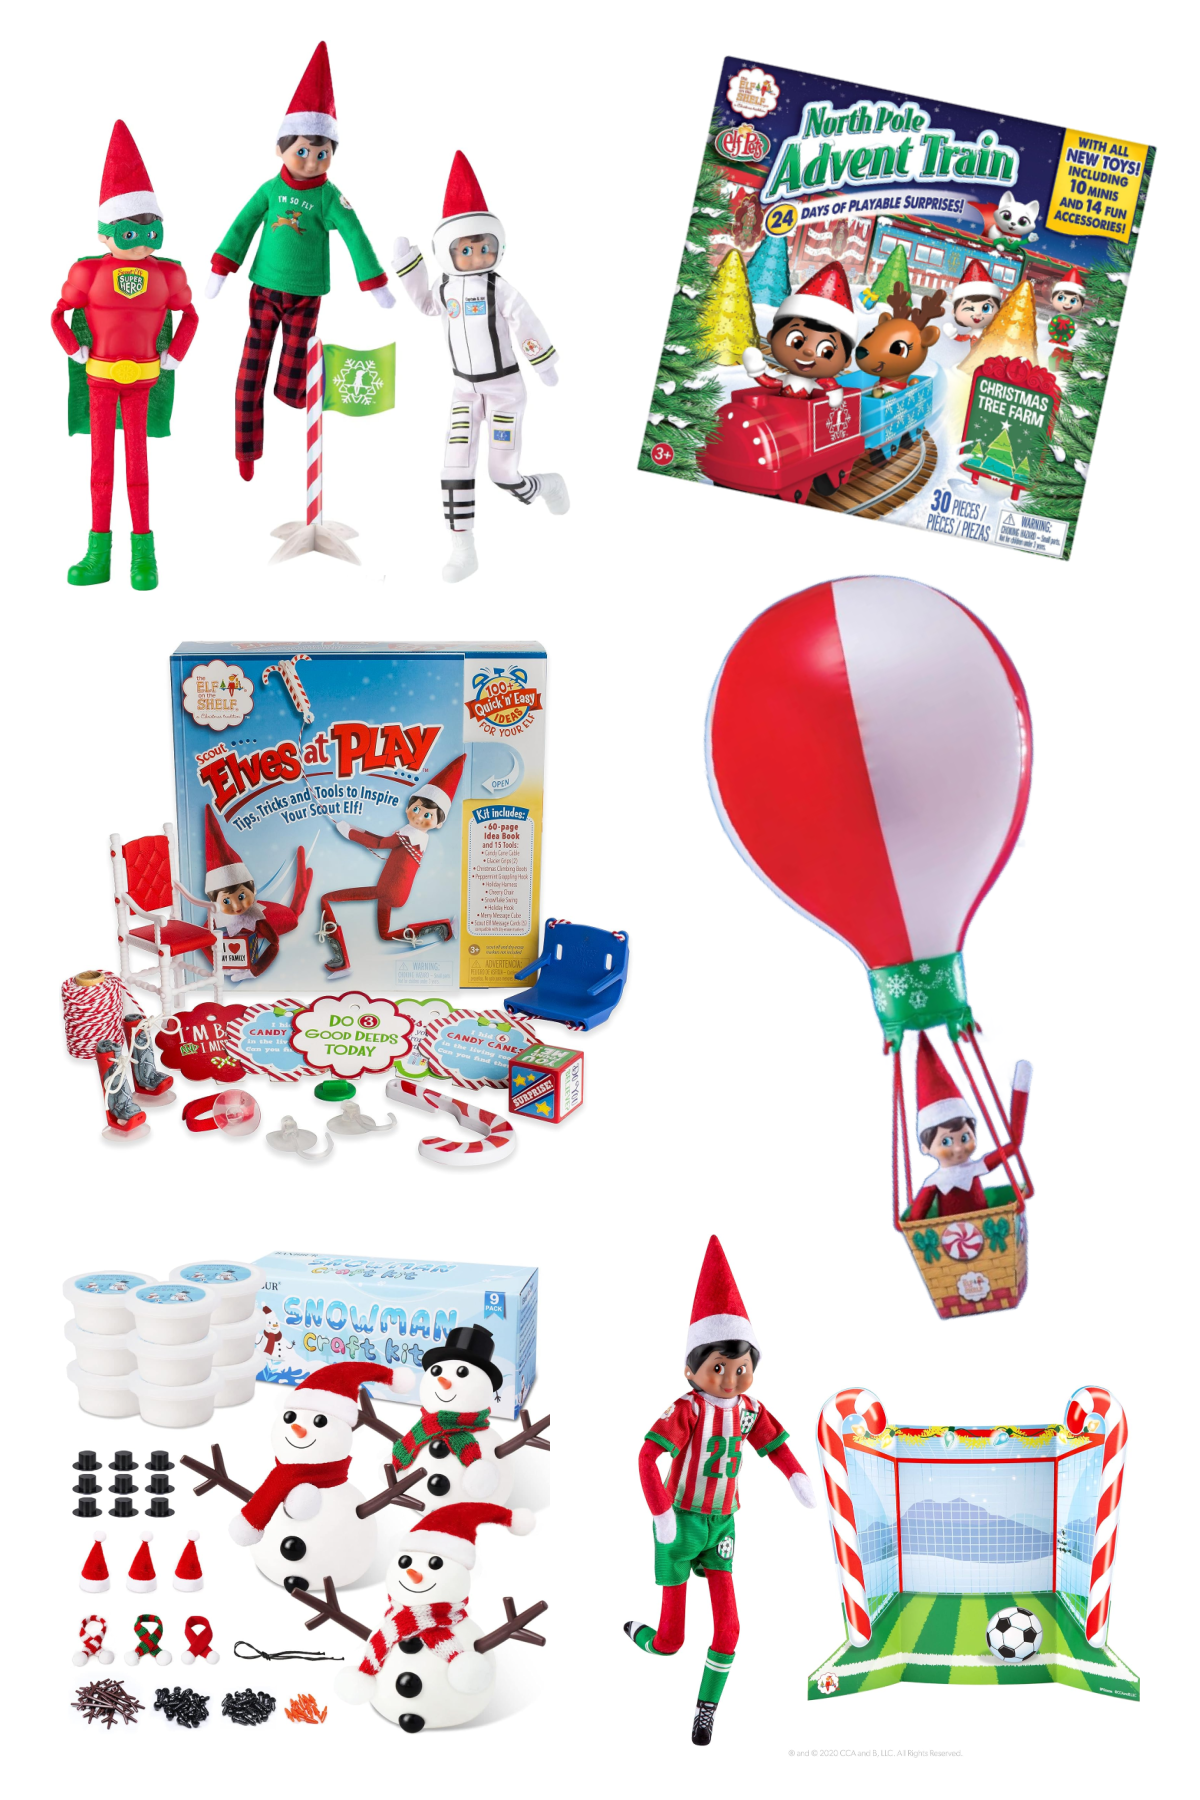 The elf on the shelf dolls with different clothes and accessories